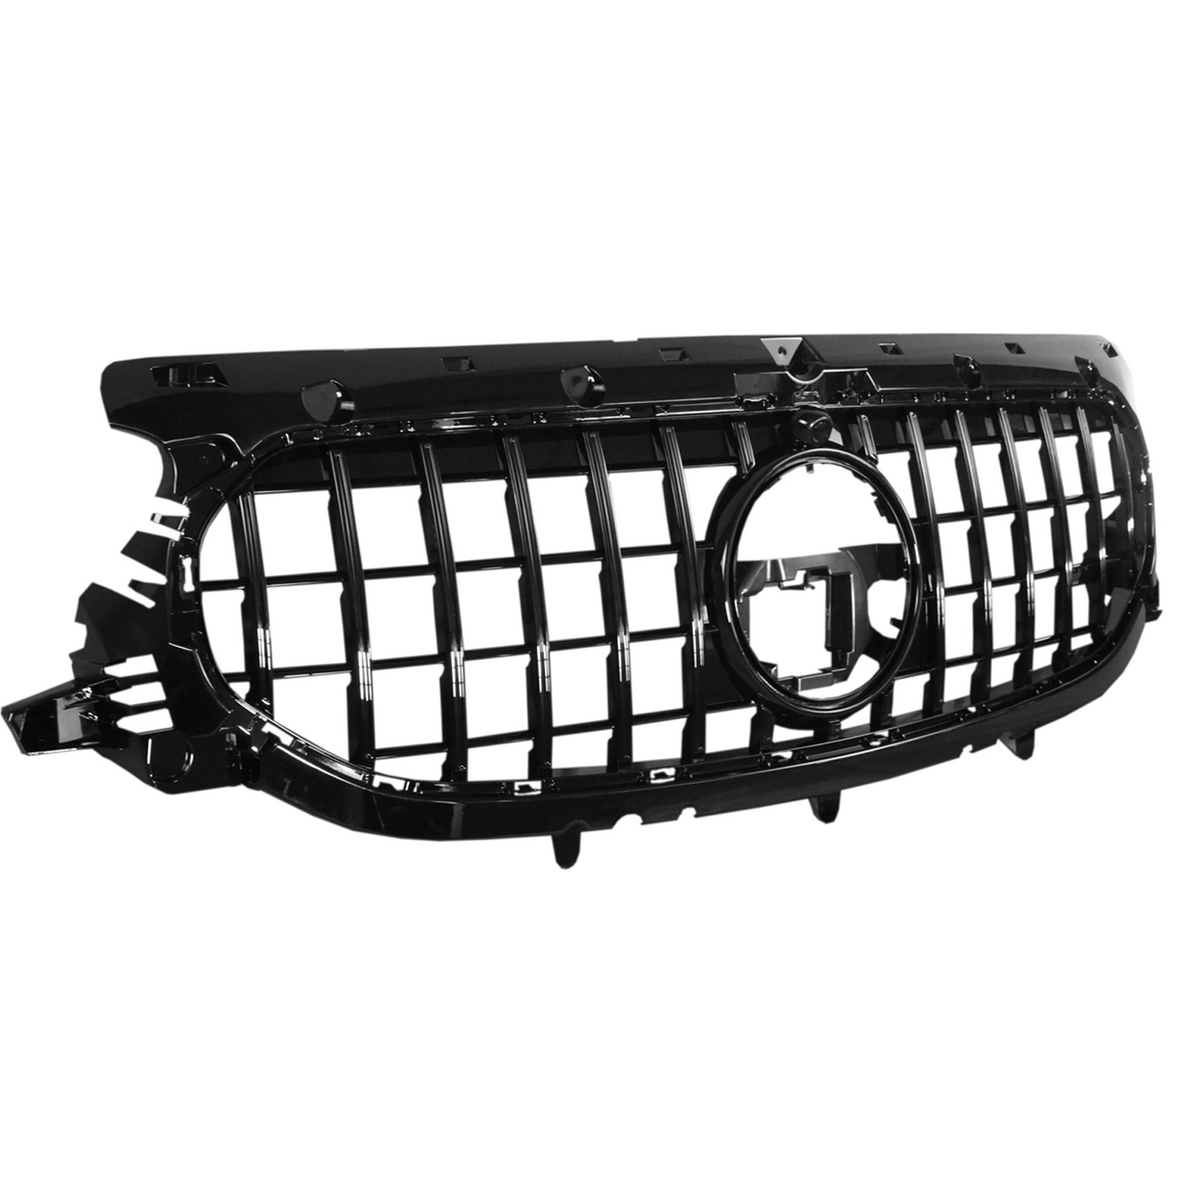 Mercedes Gla X247 2020+ - Front Grill - Panamericana Gt-r Style - All Black